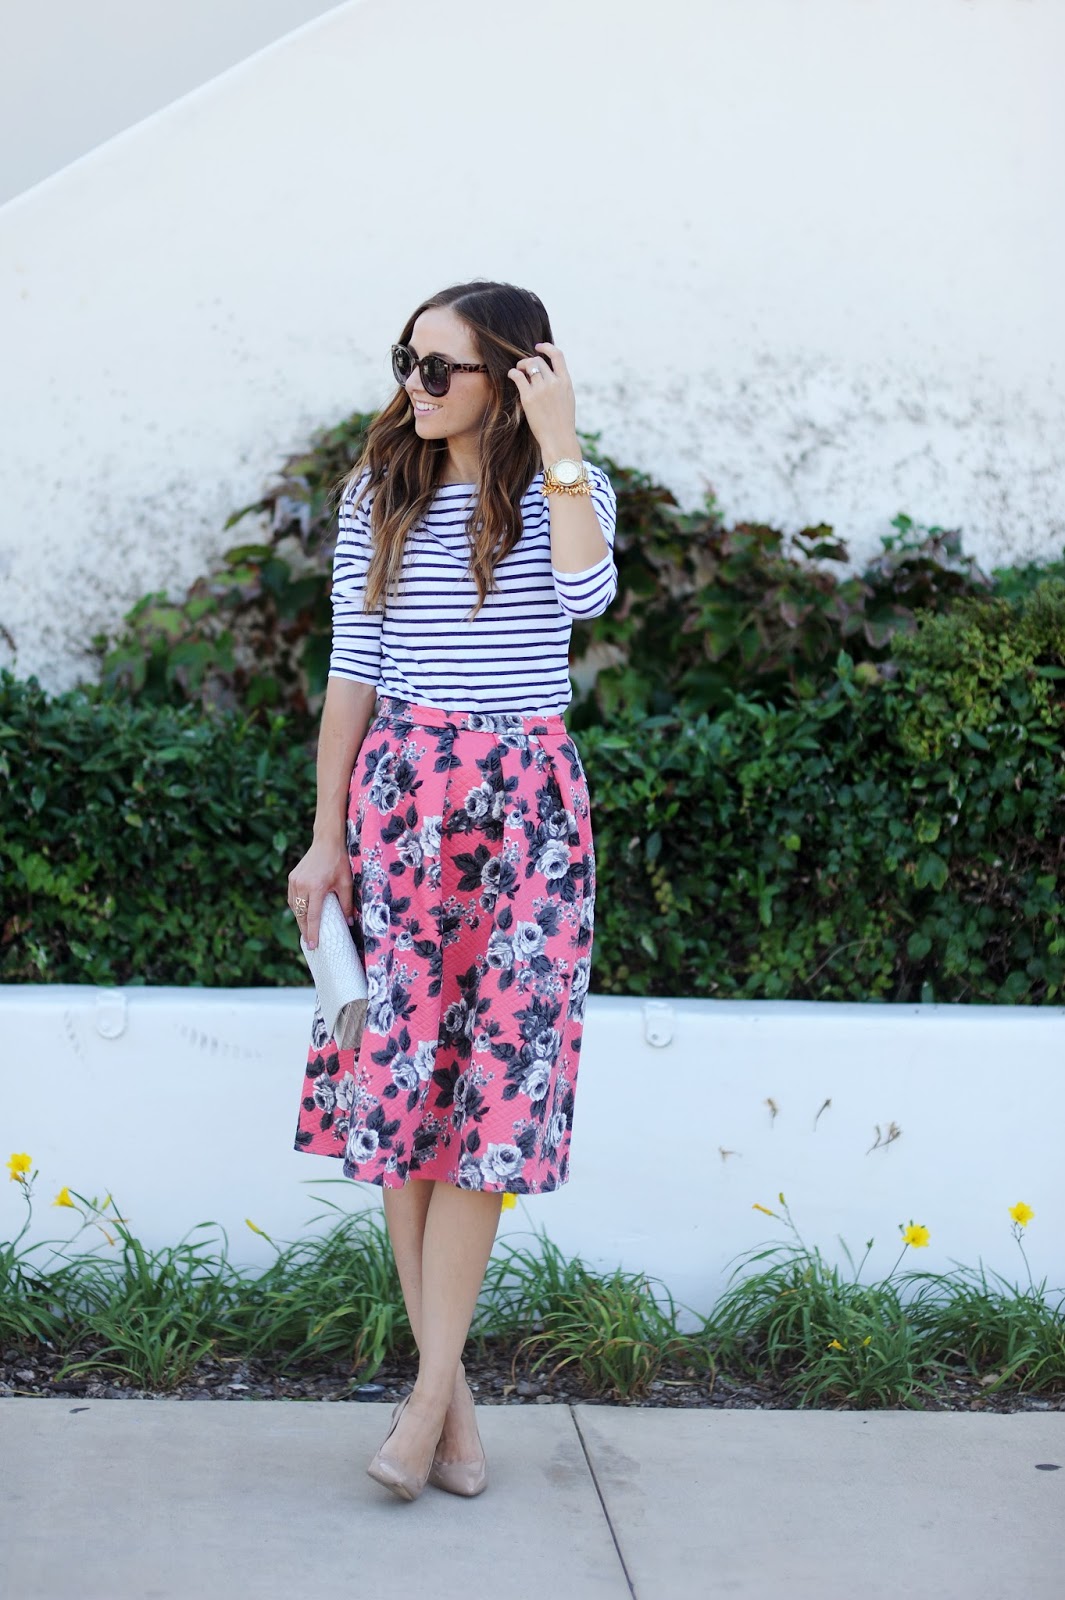 17 Trendy Floral And Striped Outfits You Will Love To Copy - fashionsy.com